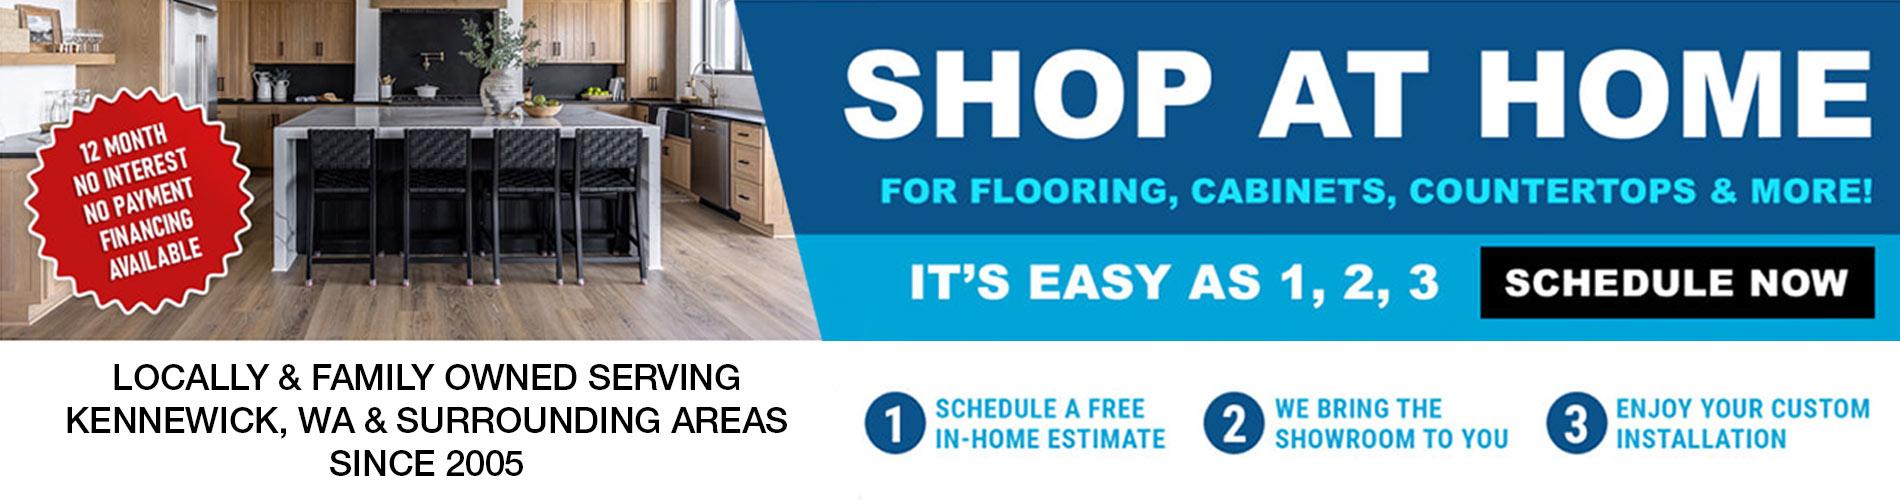 Shop at home for flooring, cabinets, countertops & more - It's easy as 1, 2, 3. Schedule Now!